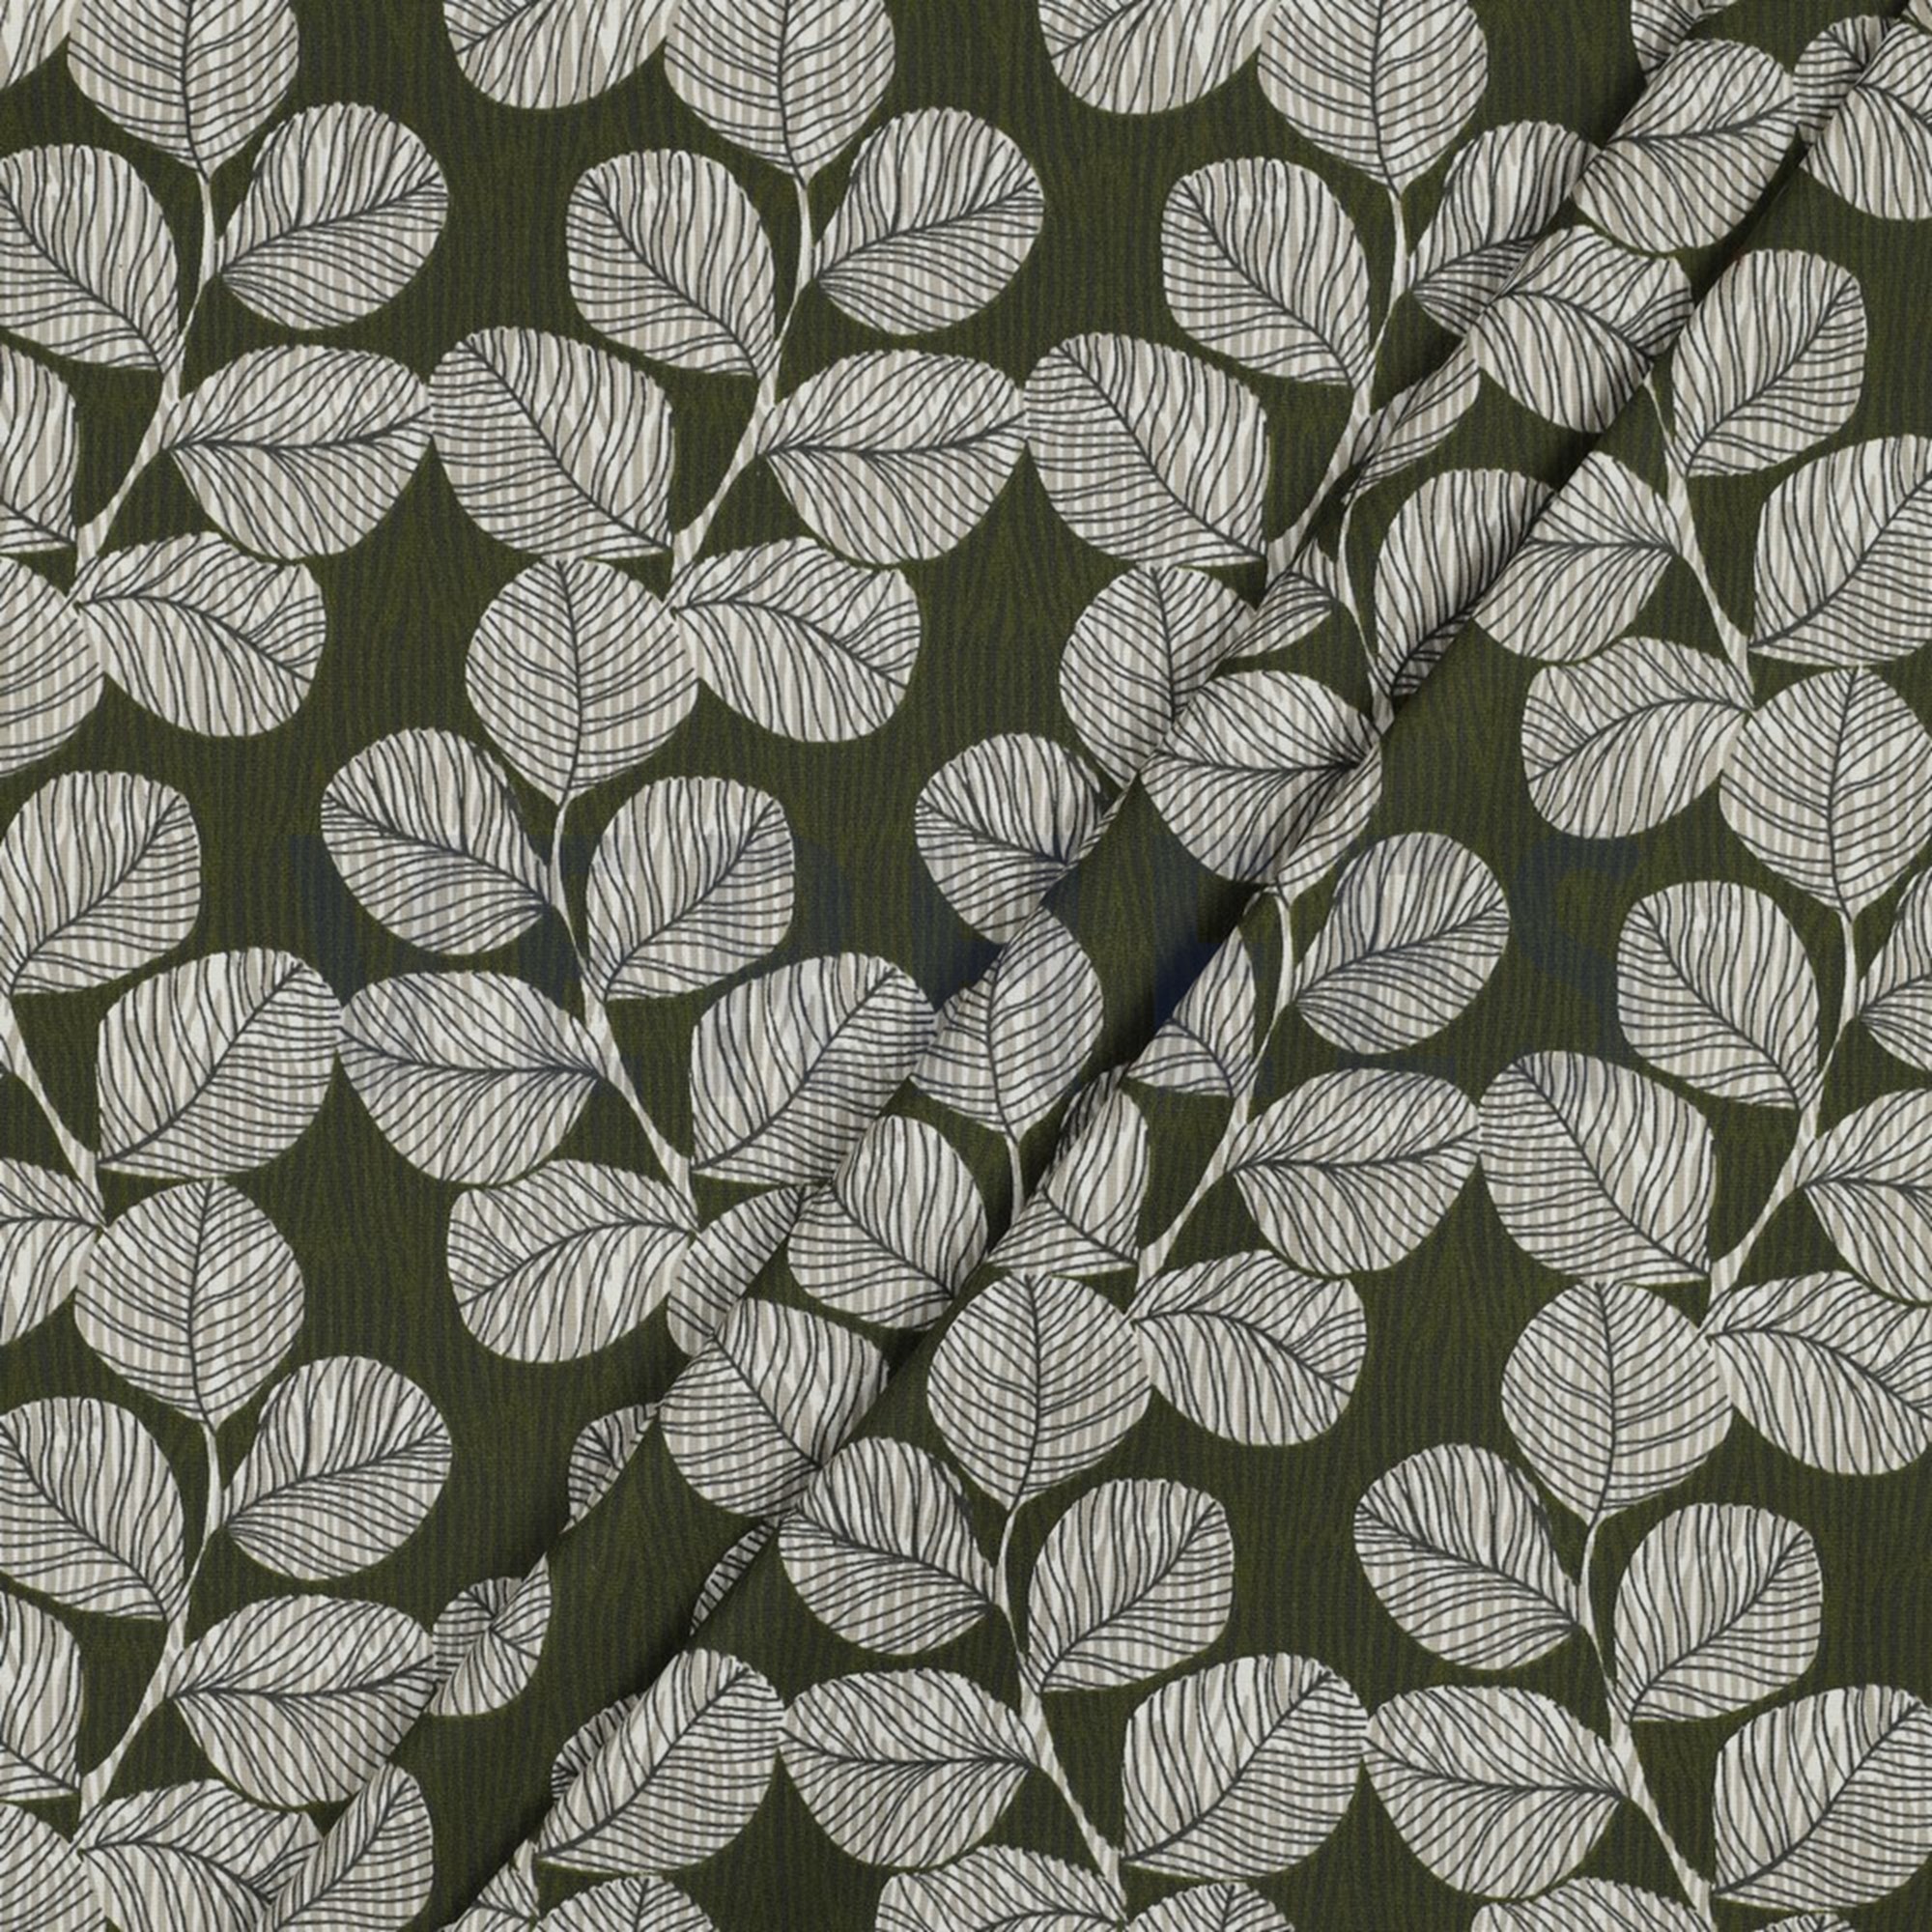 COATED COTTON LEAVES ARMY GREEN (high resolution) #2